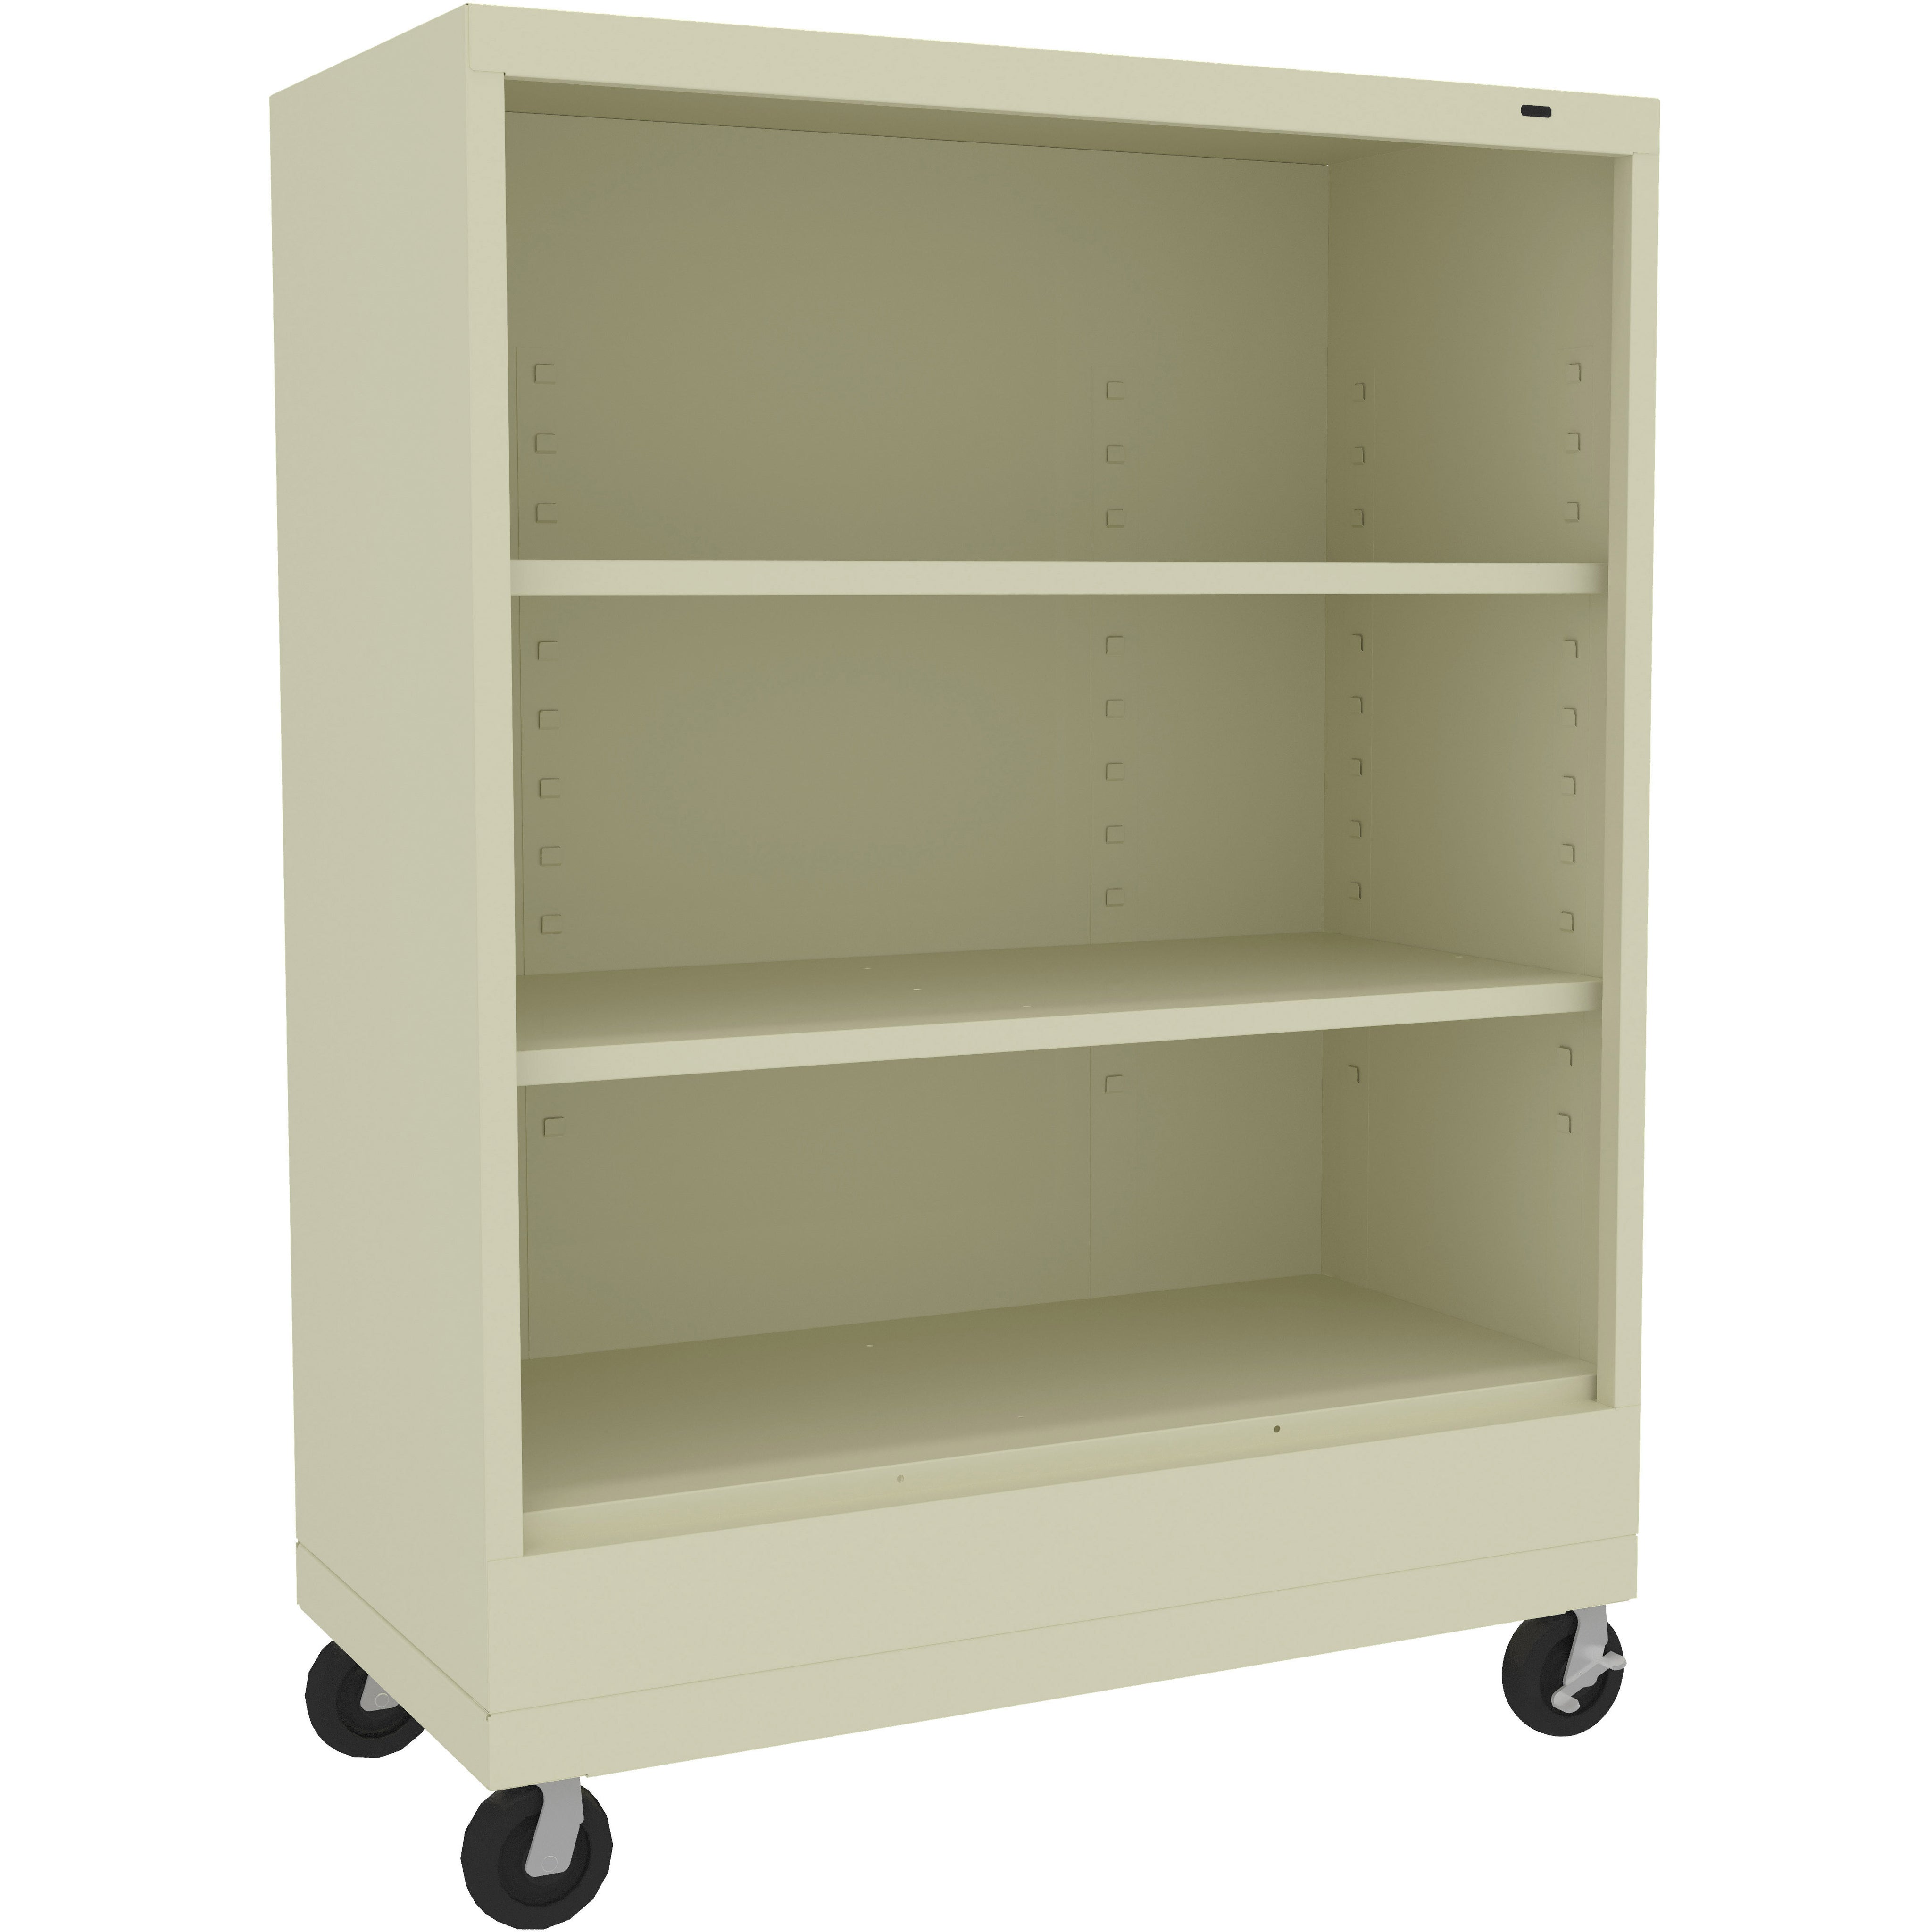 Tennsco 43" High Welded Bookcase with Casters - 18" Deep, BC18-42M